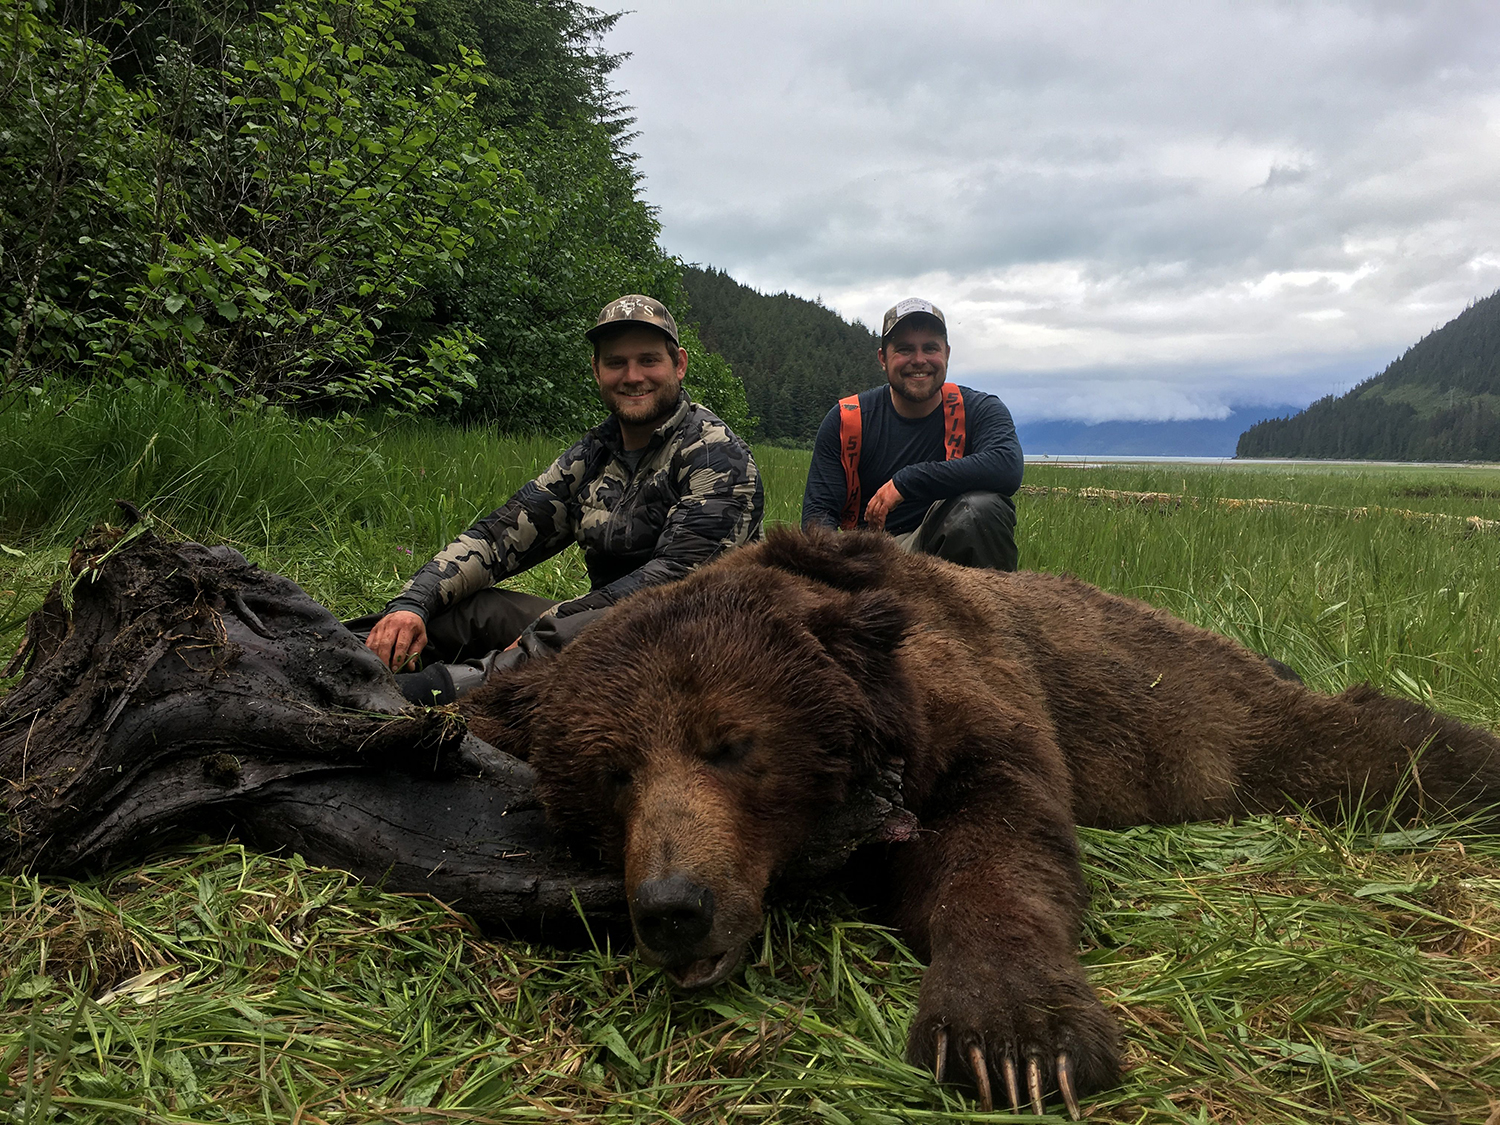 A hunter kneeling beside a large brown bear in the Tongass National Forest.